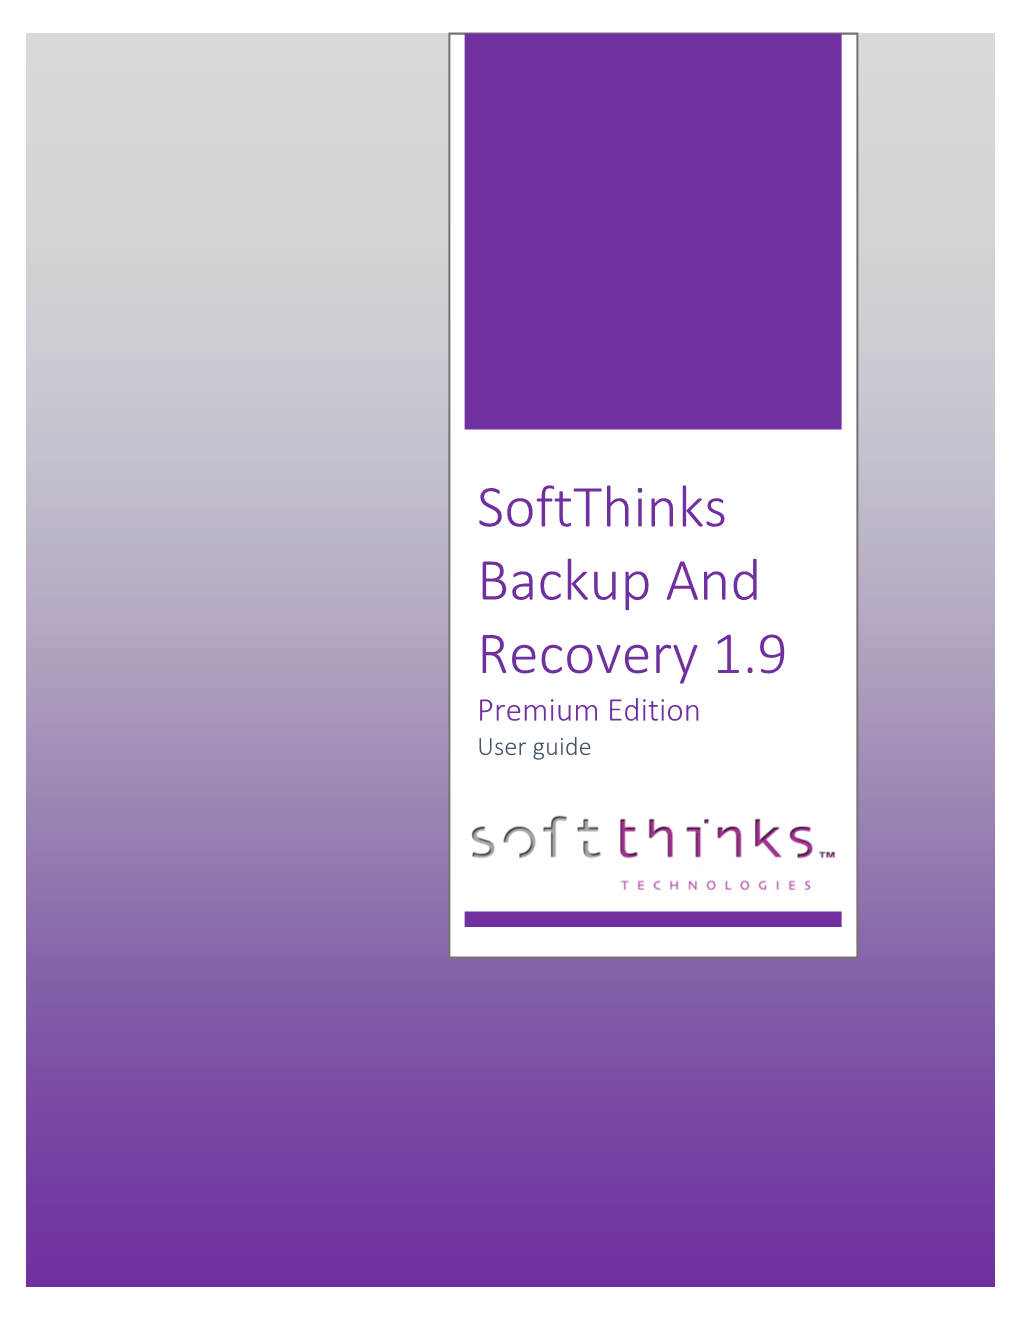 Softthinks Backup and Recovery 1.9 Premium Edition User Guide